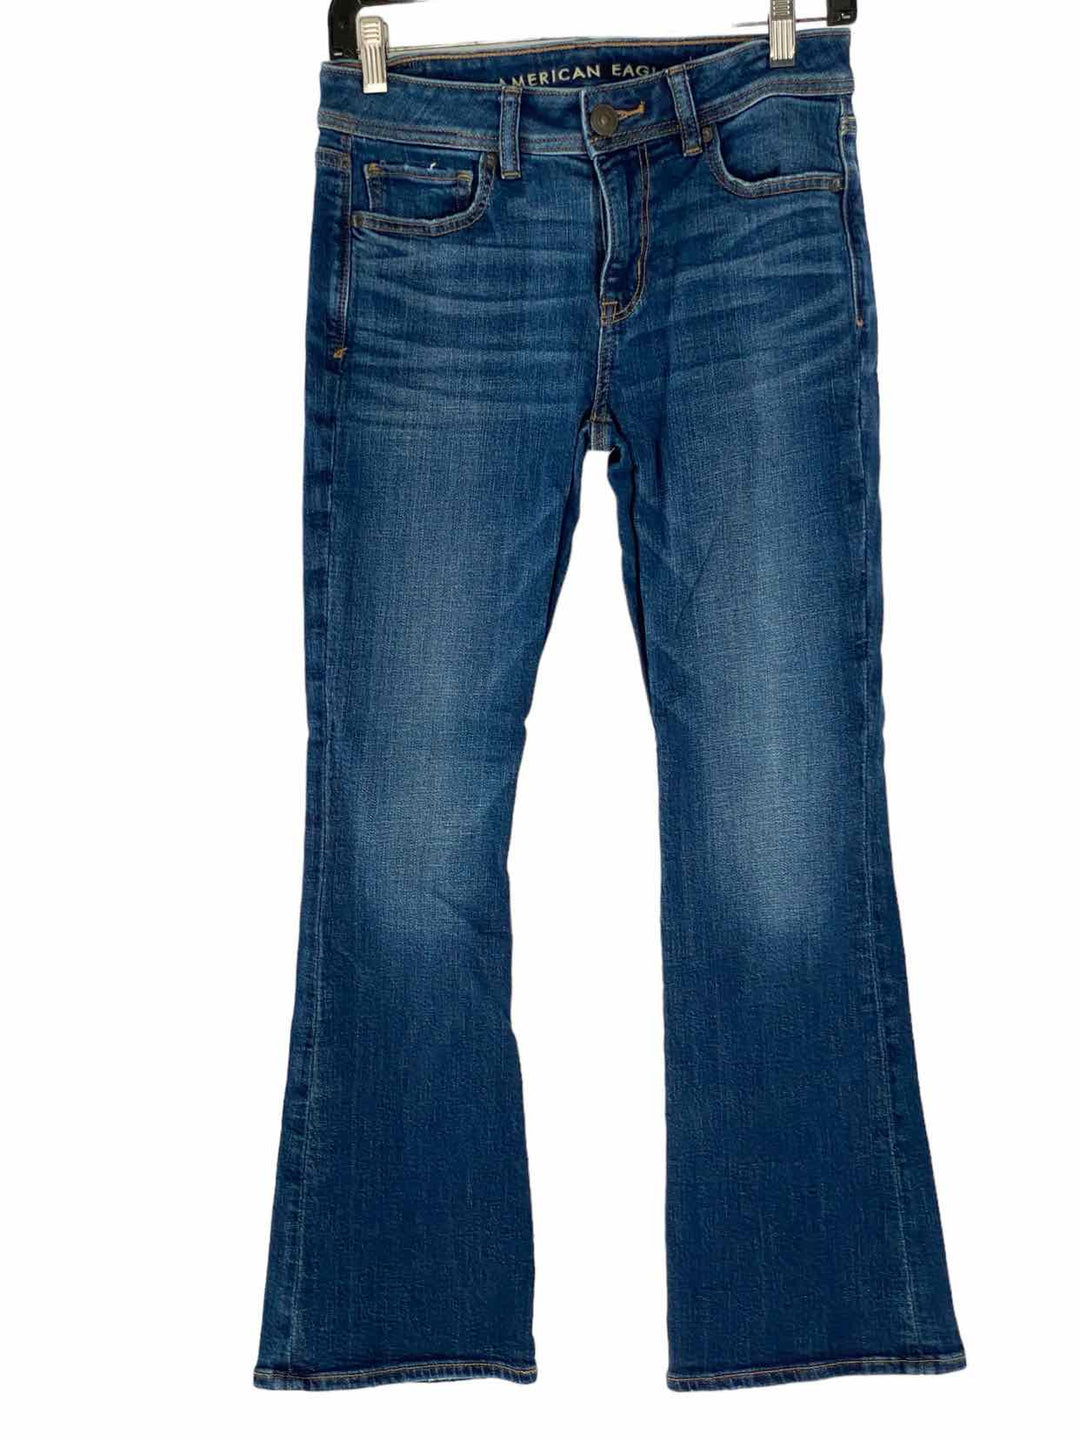 American Eagle Size 4 Jeans